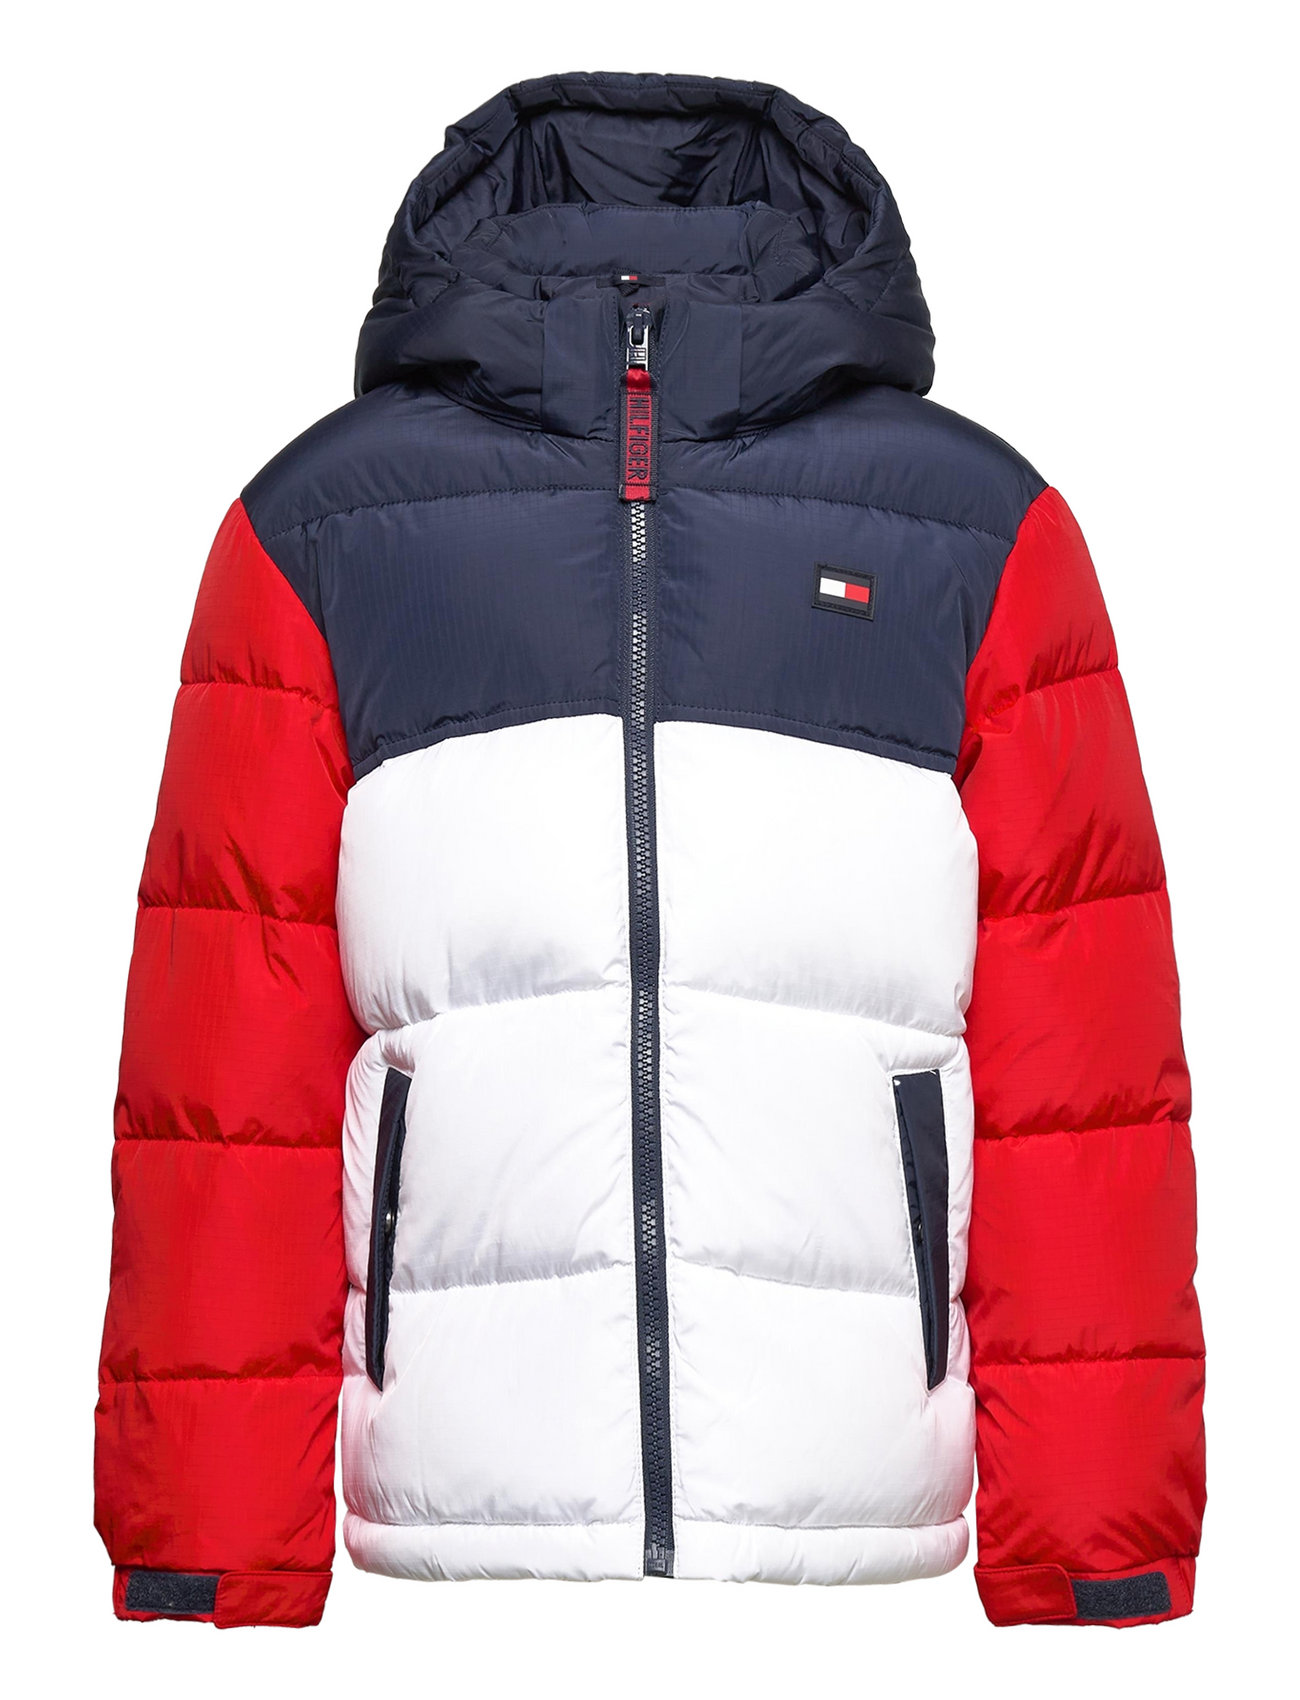 Tommy Hilfiger Alaska Colourblock Puffer Jacket 239.90 €. Buy Puffer & Padded from Hilfiger at Boozt.com. Fast and easy returns